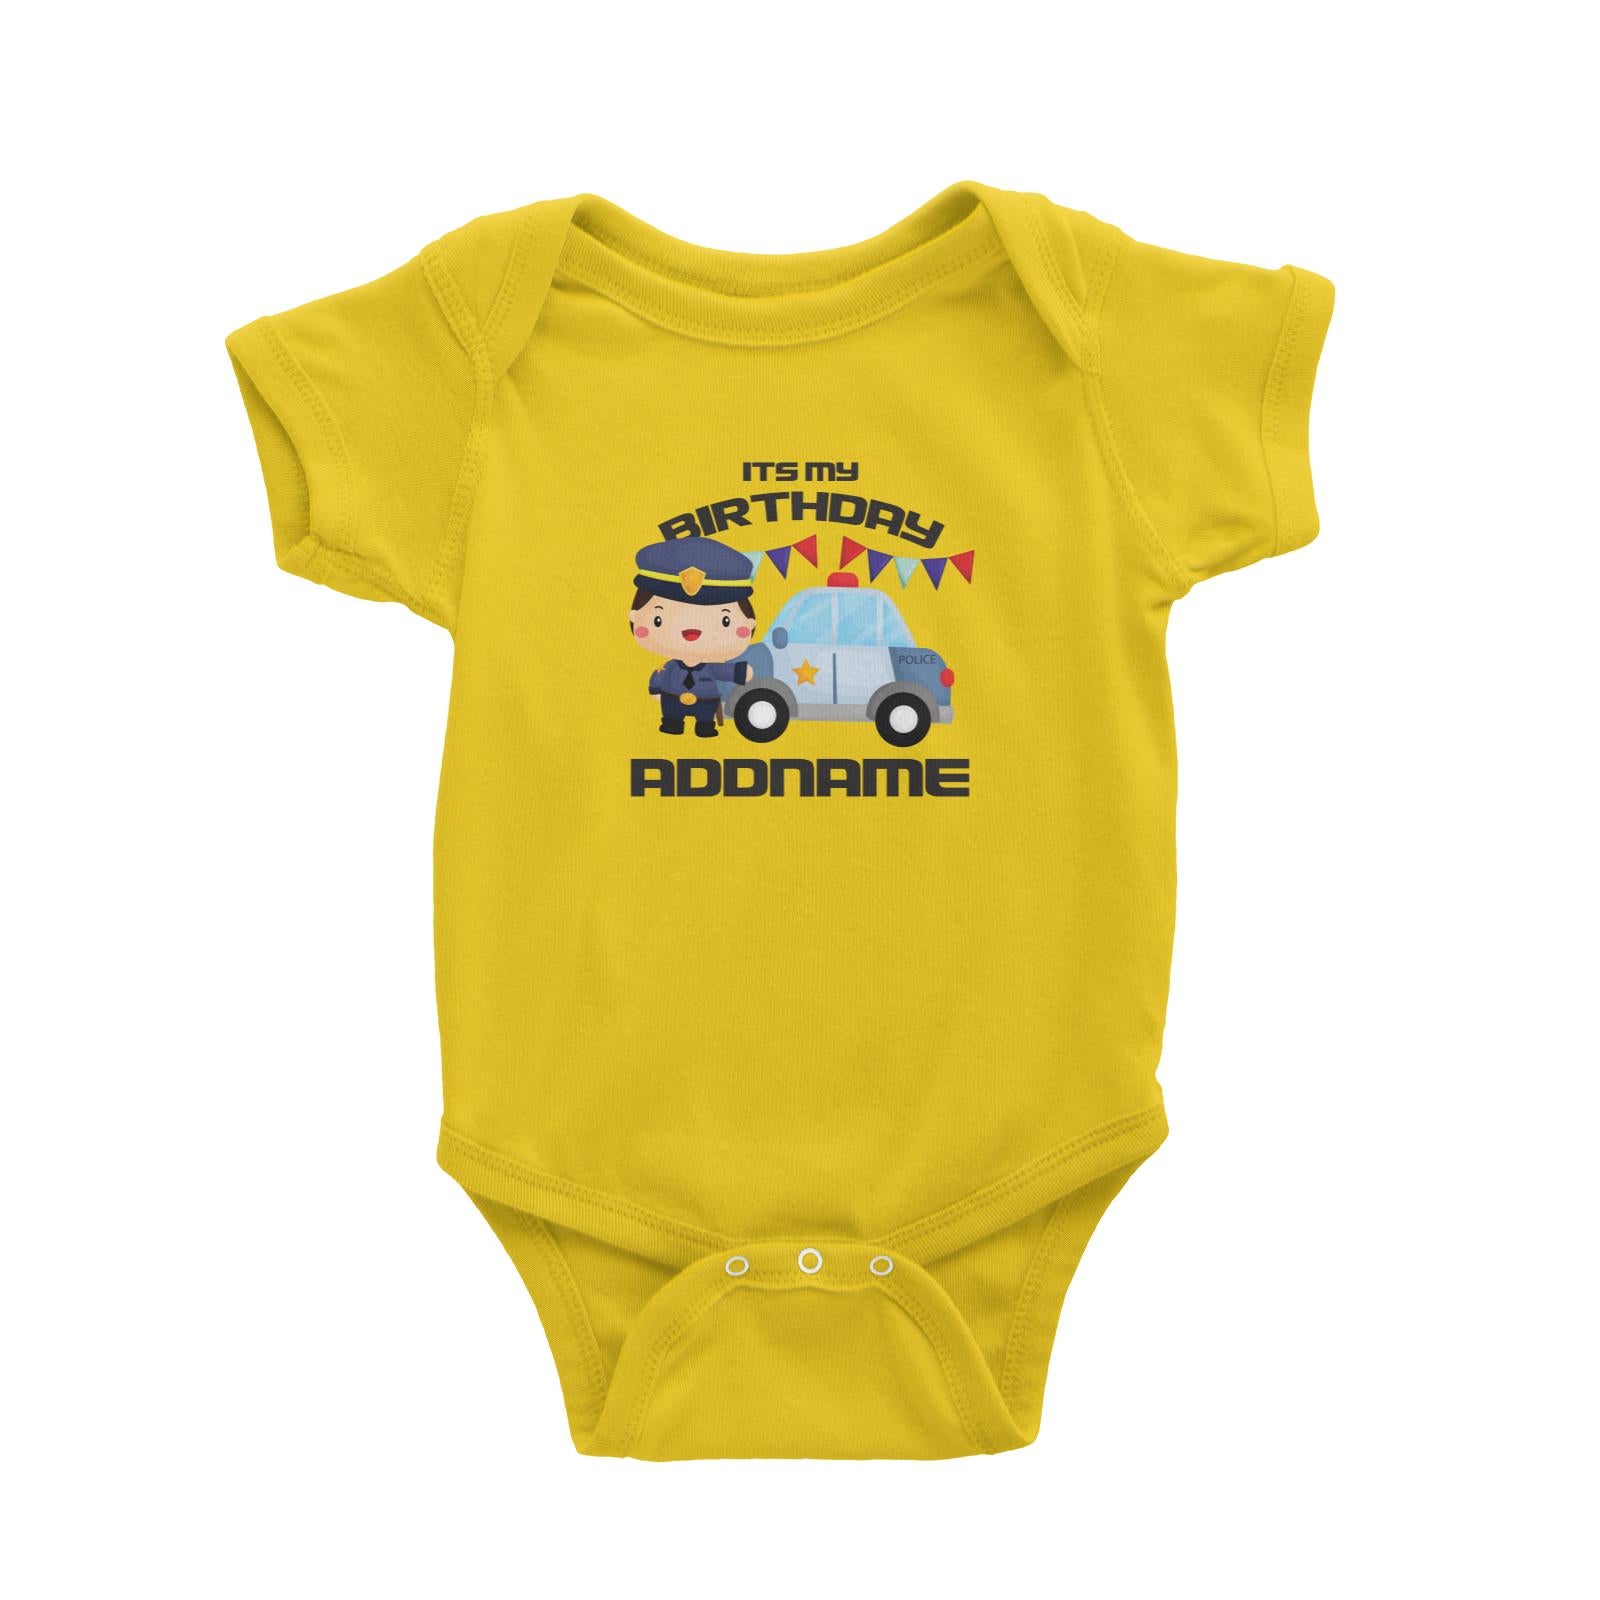 Birthday Police Officer Boy In Suit With Police Car Its My Birthday Addname Baby Romper